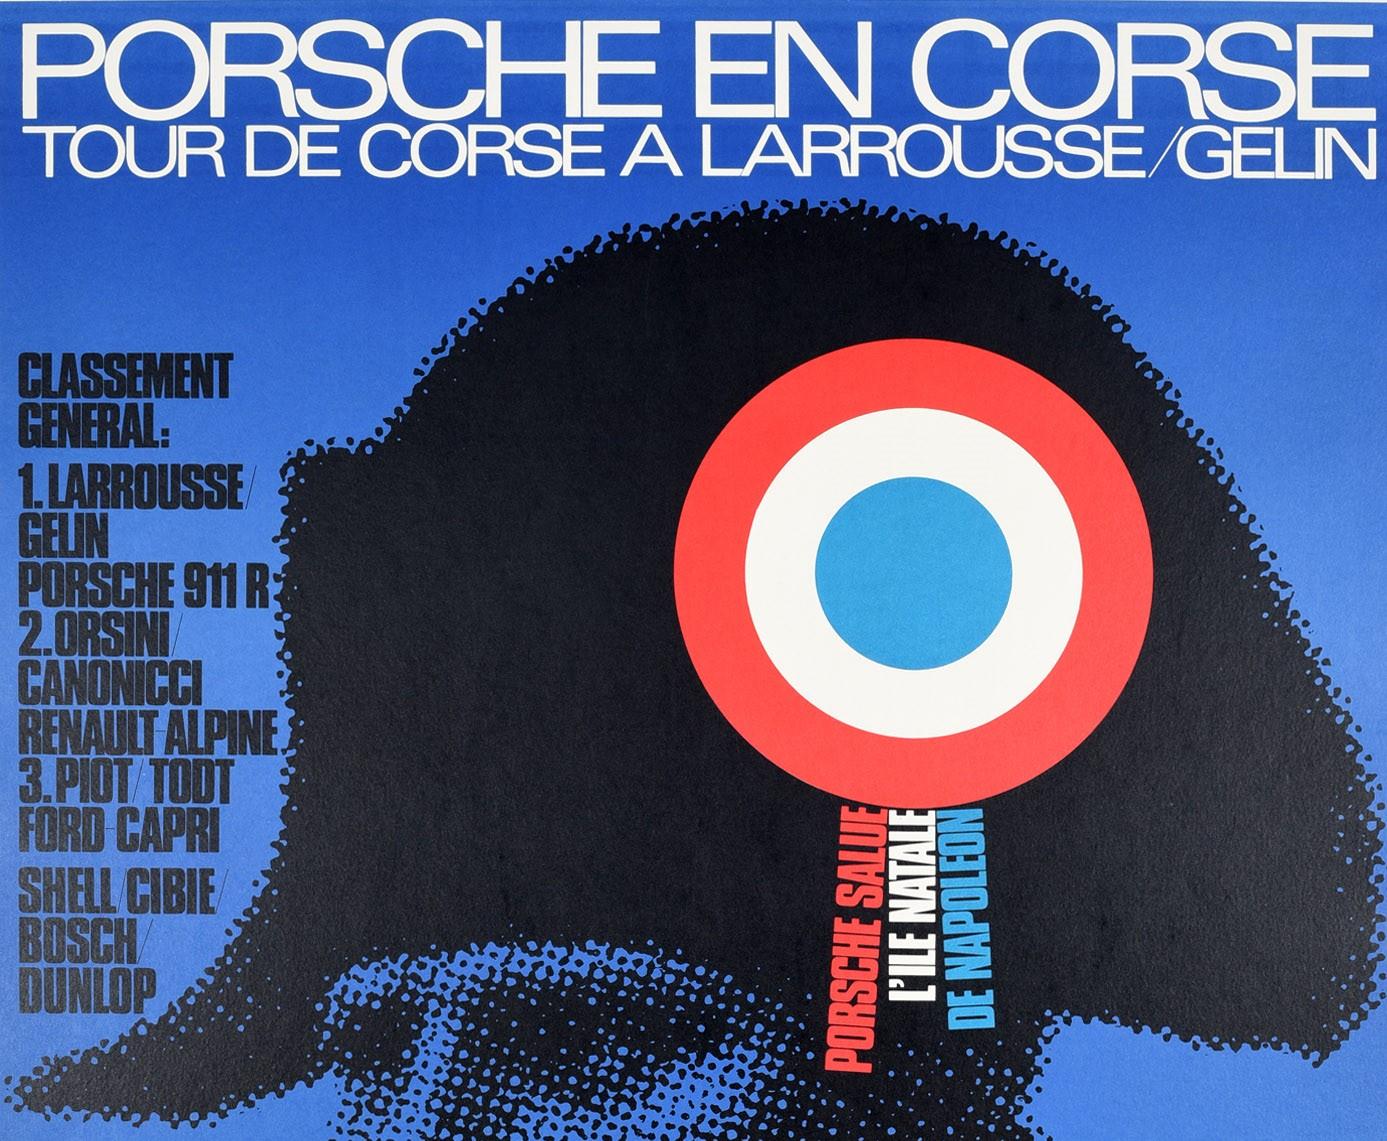 Original vintage motor sport poster advertising Porsche's winning performance in Corsica at the Tour de Corse by Gerard Larrousse and Maurice Gelin - En Corse Tour De Corse A Larrousse Gelin - featuring a great design by Erich Strenger (1922-1993)